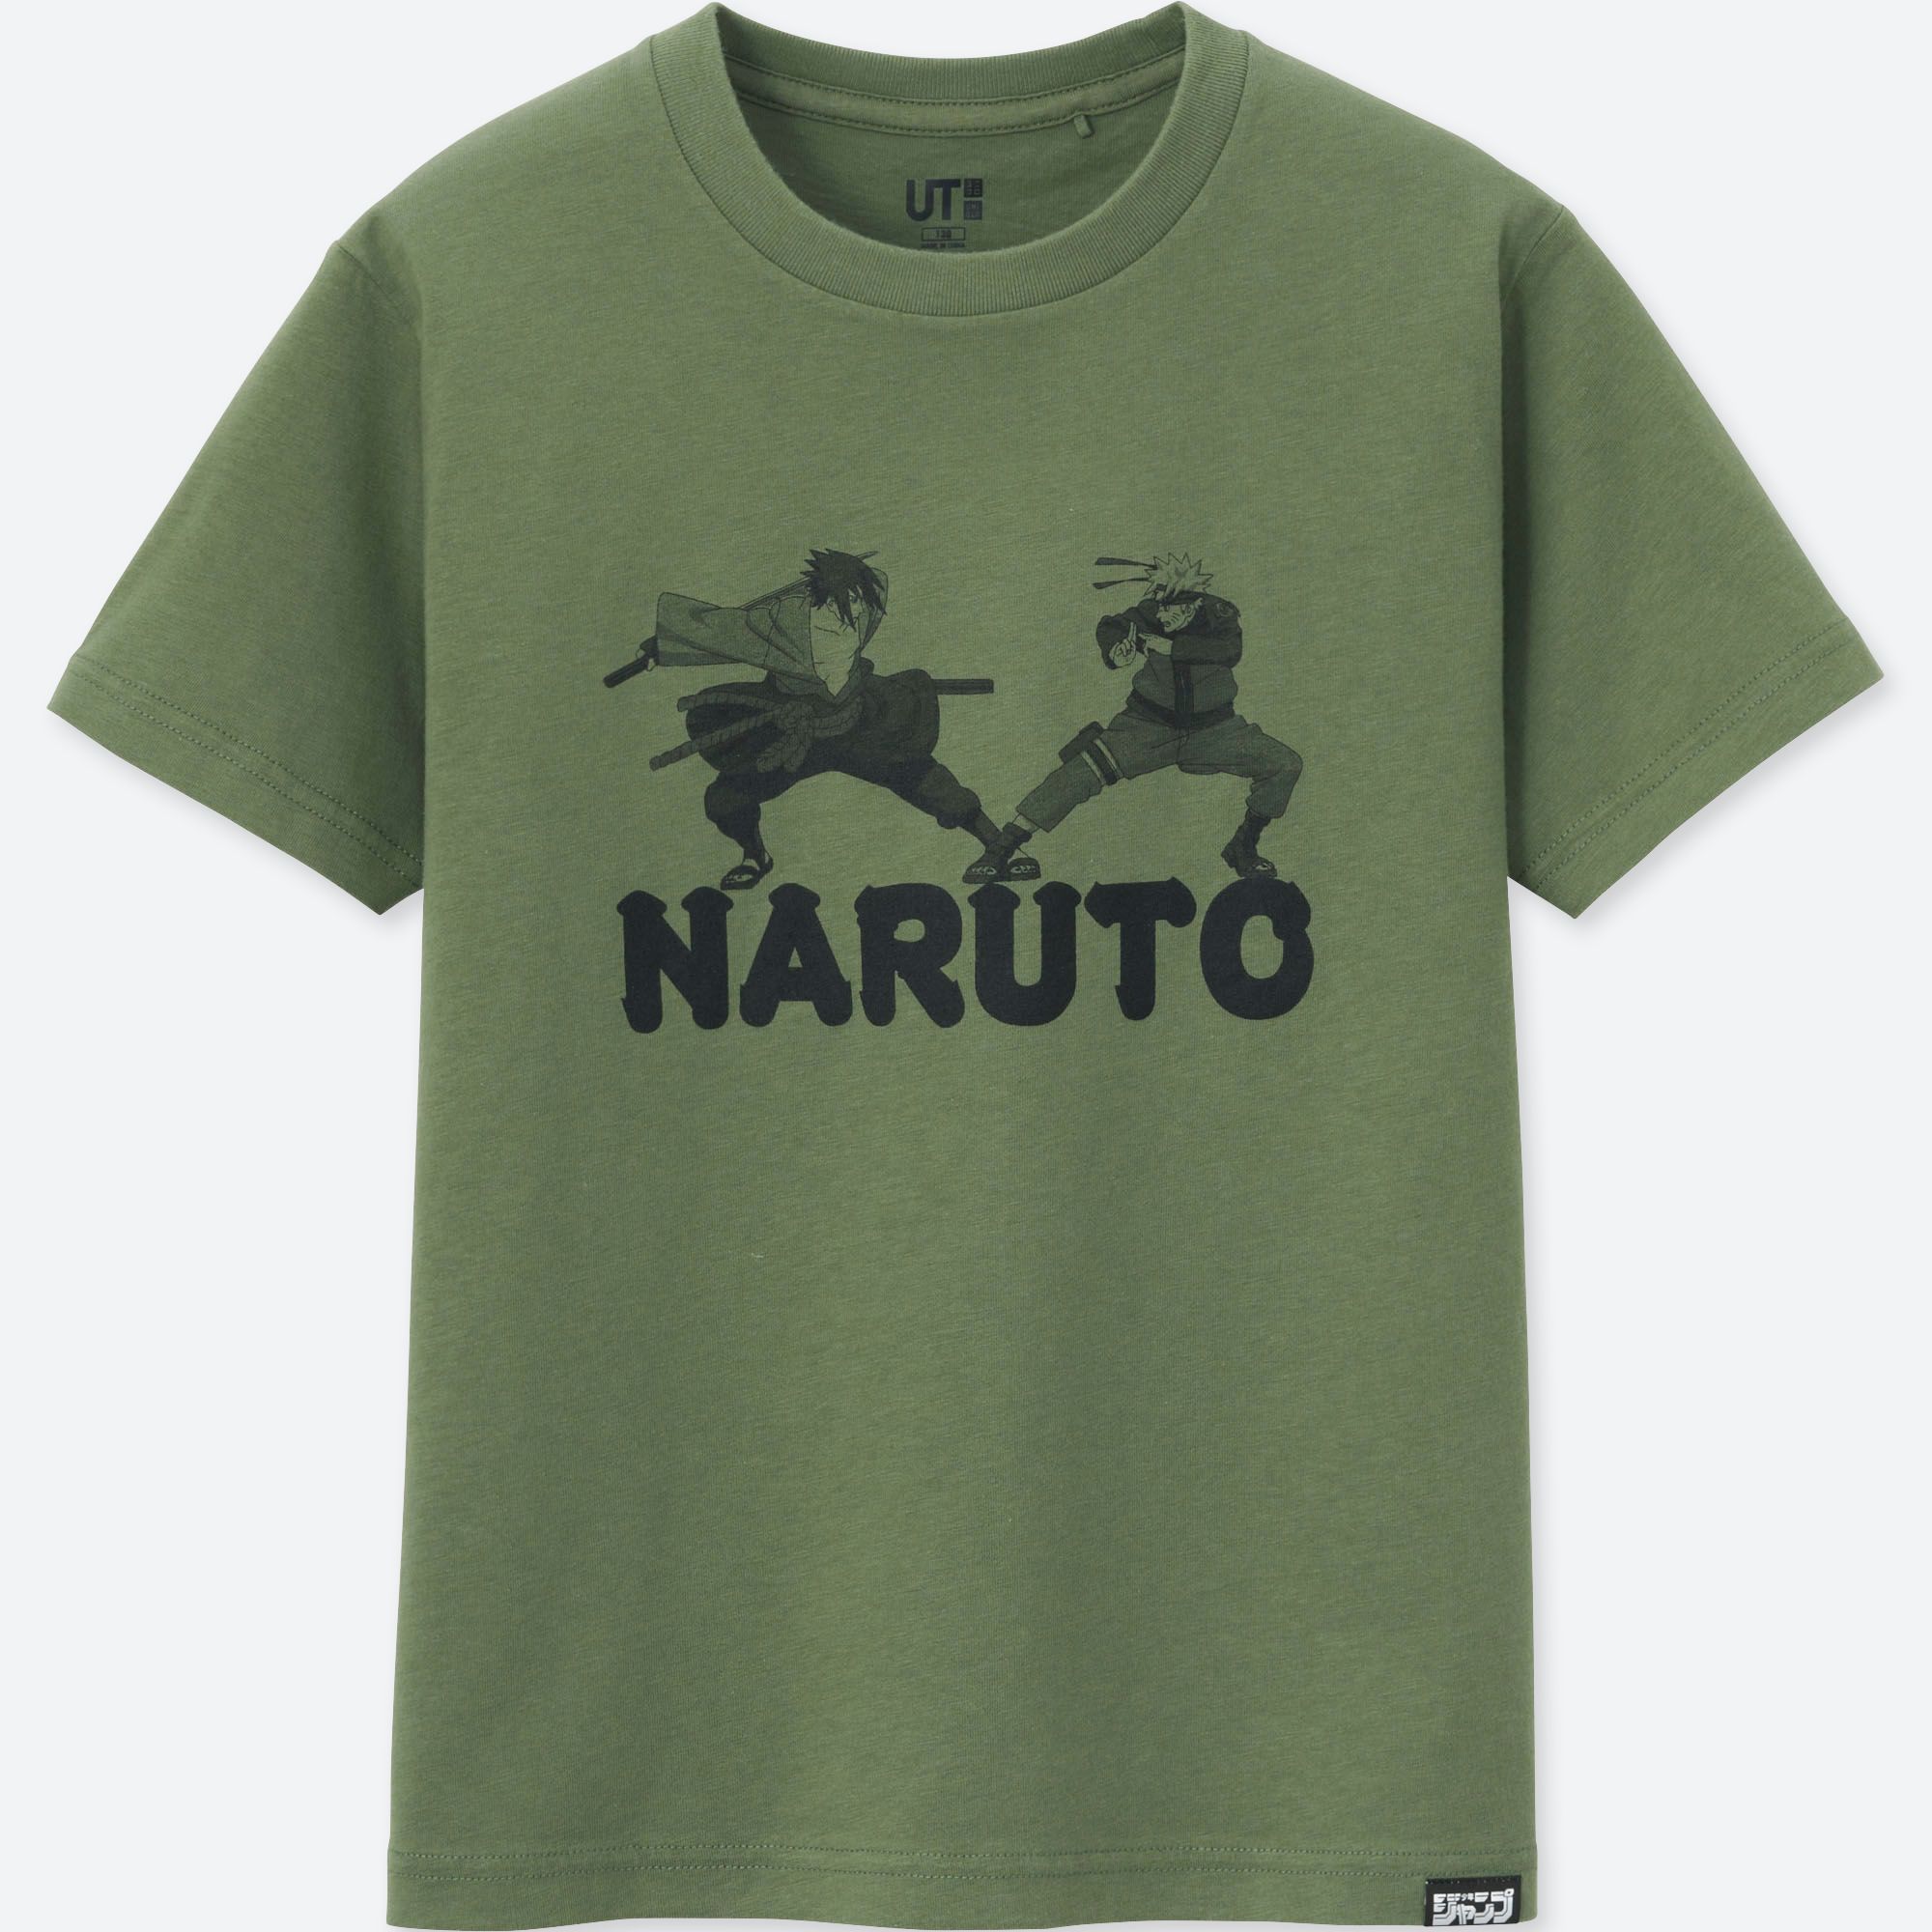 Celebrate Shonen Jump's 50th Anniversary with This Line from UNIQLO